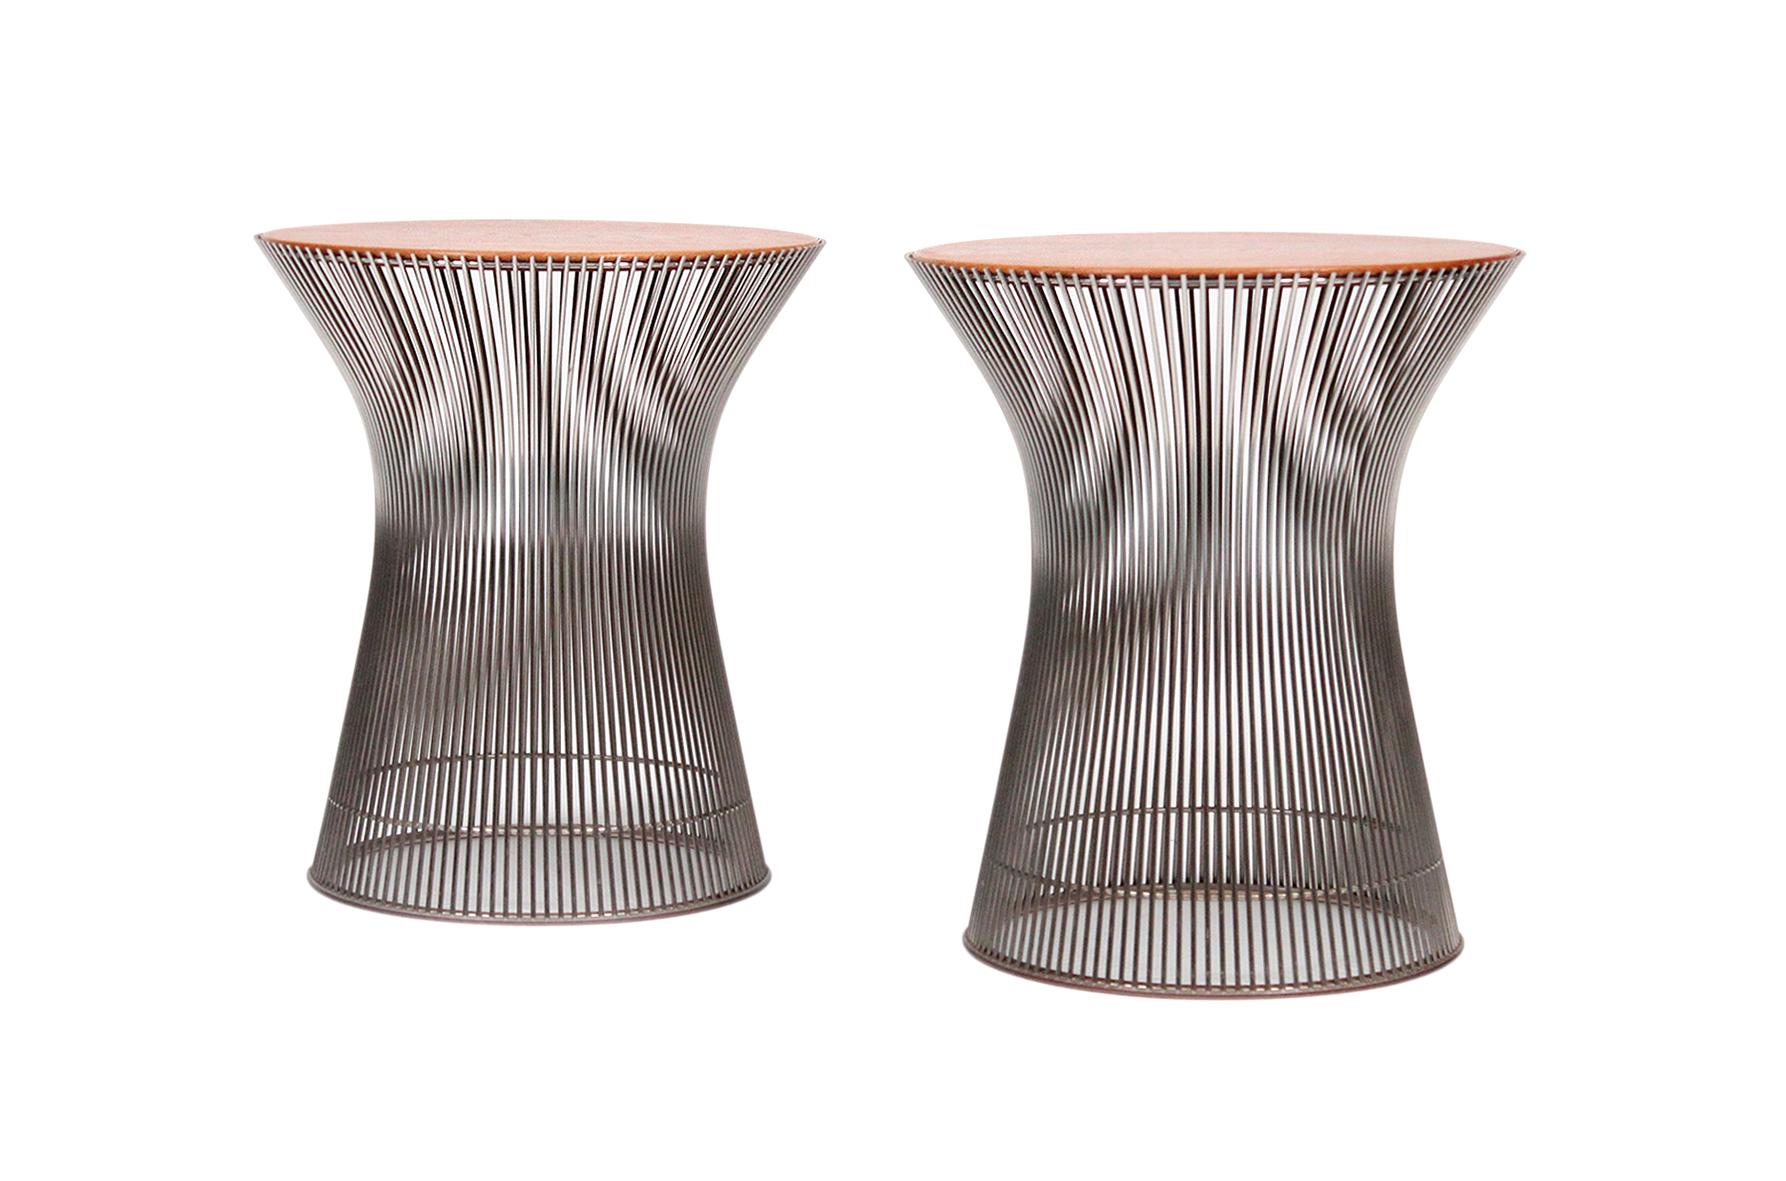 Pair of side tables by Warren Platner from his now iconic collection for Knoll. These examples in chrome wire with oak tops.
   